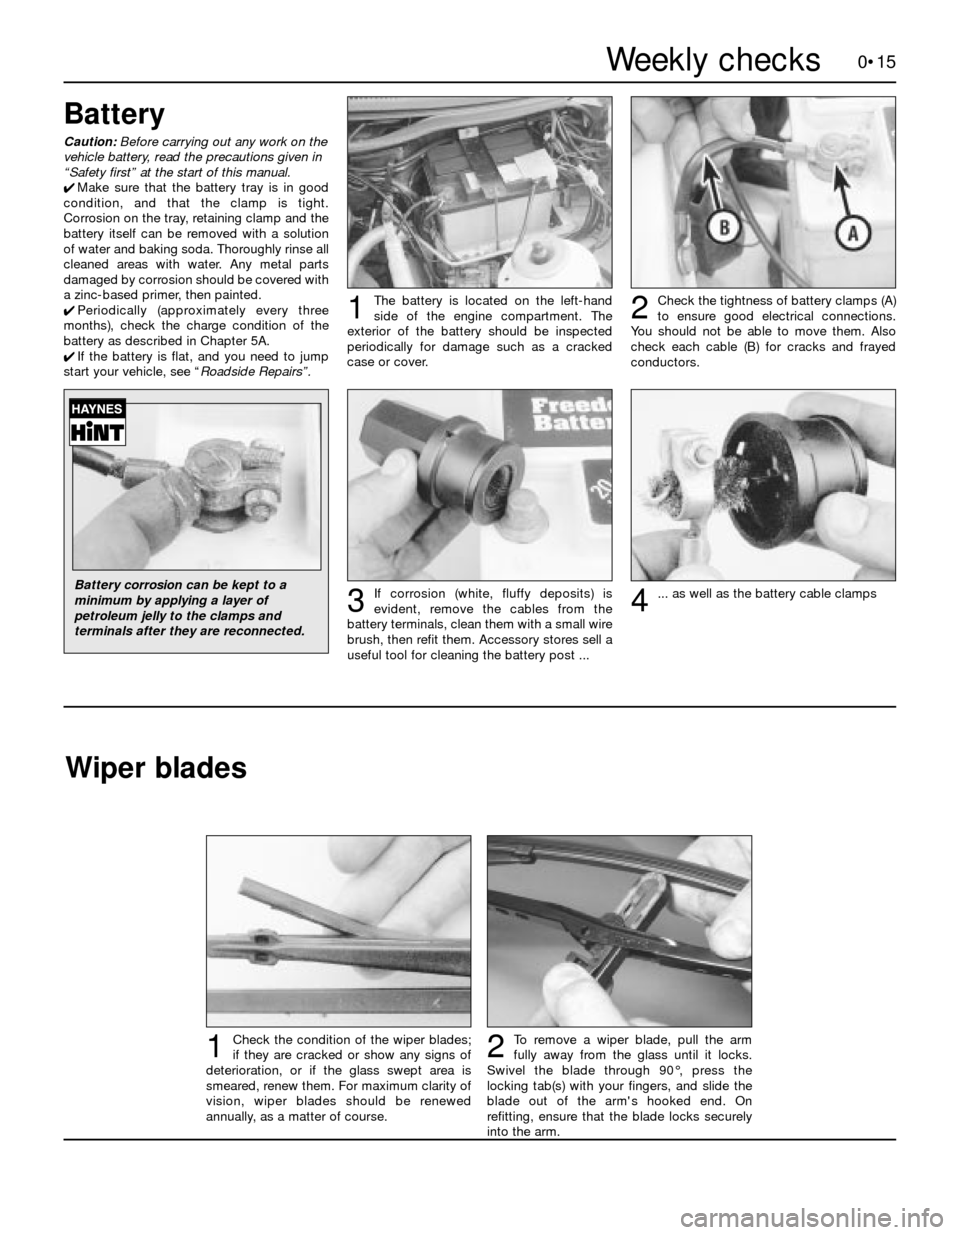 FORD SIERRA 1982 1.G Introduction Workshop Manual 0•15
To remove a wiper blade, pull the arm
fully away from the glass until it locks.
Swivel the blade through 90°, press the
locking tab(s) with your fingers, and slide the
blade out of the arms h